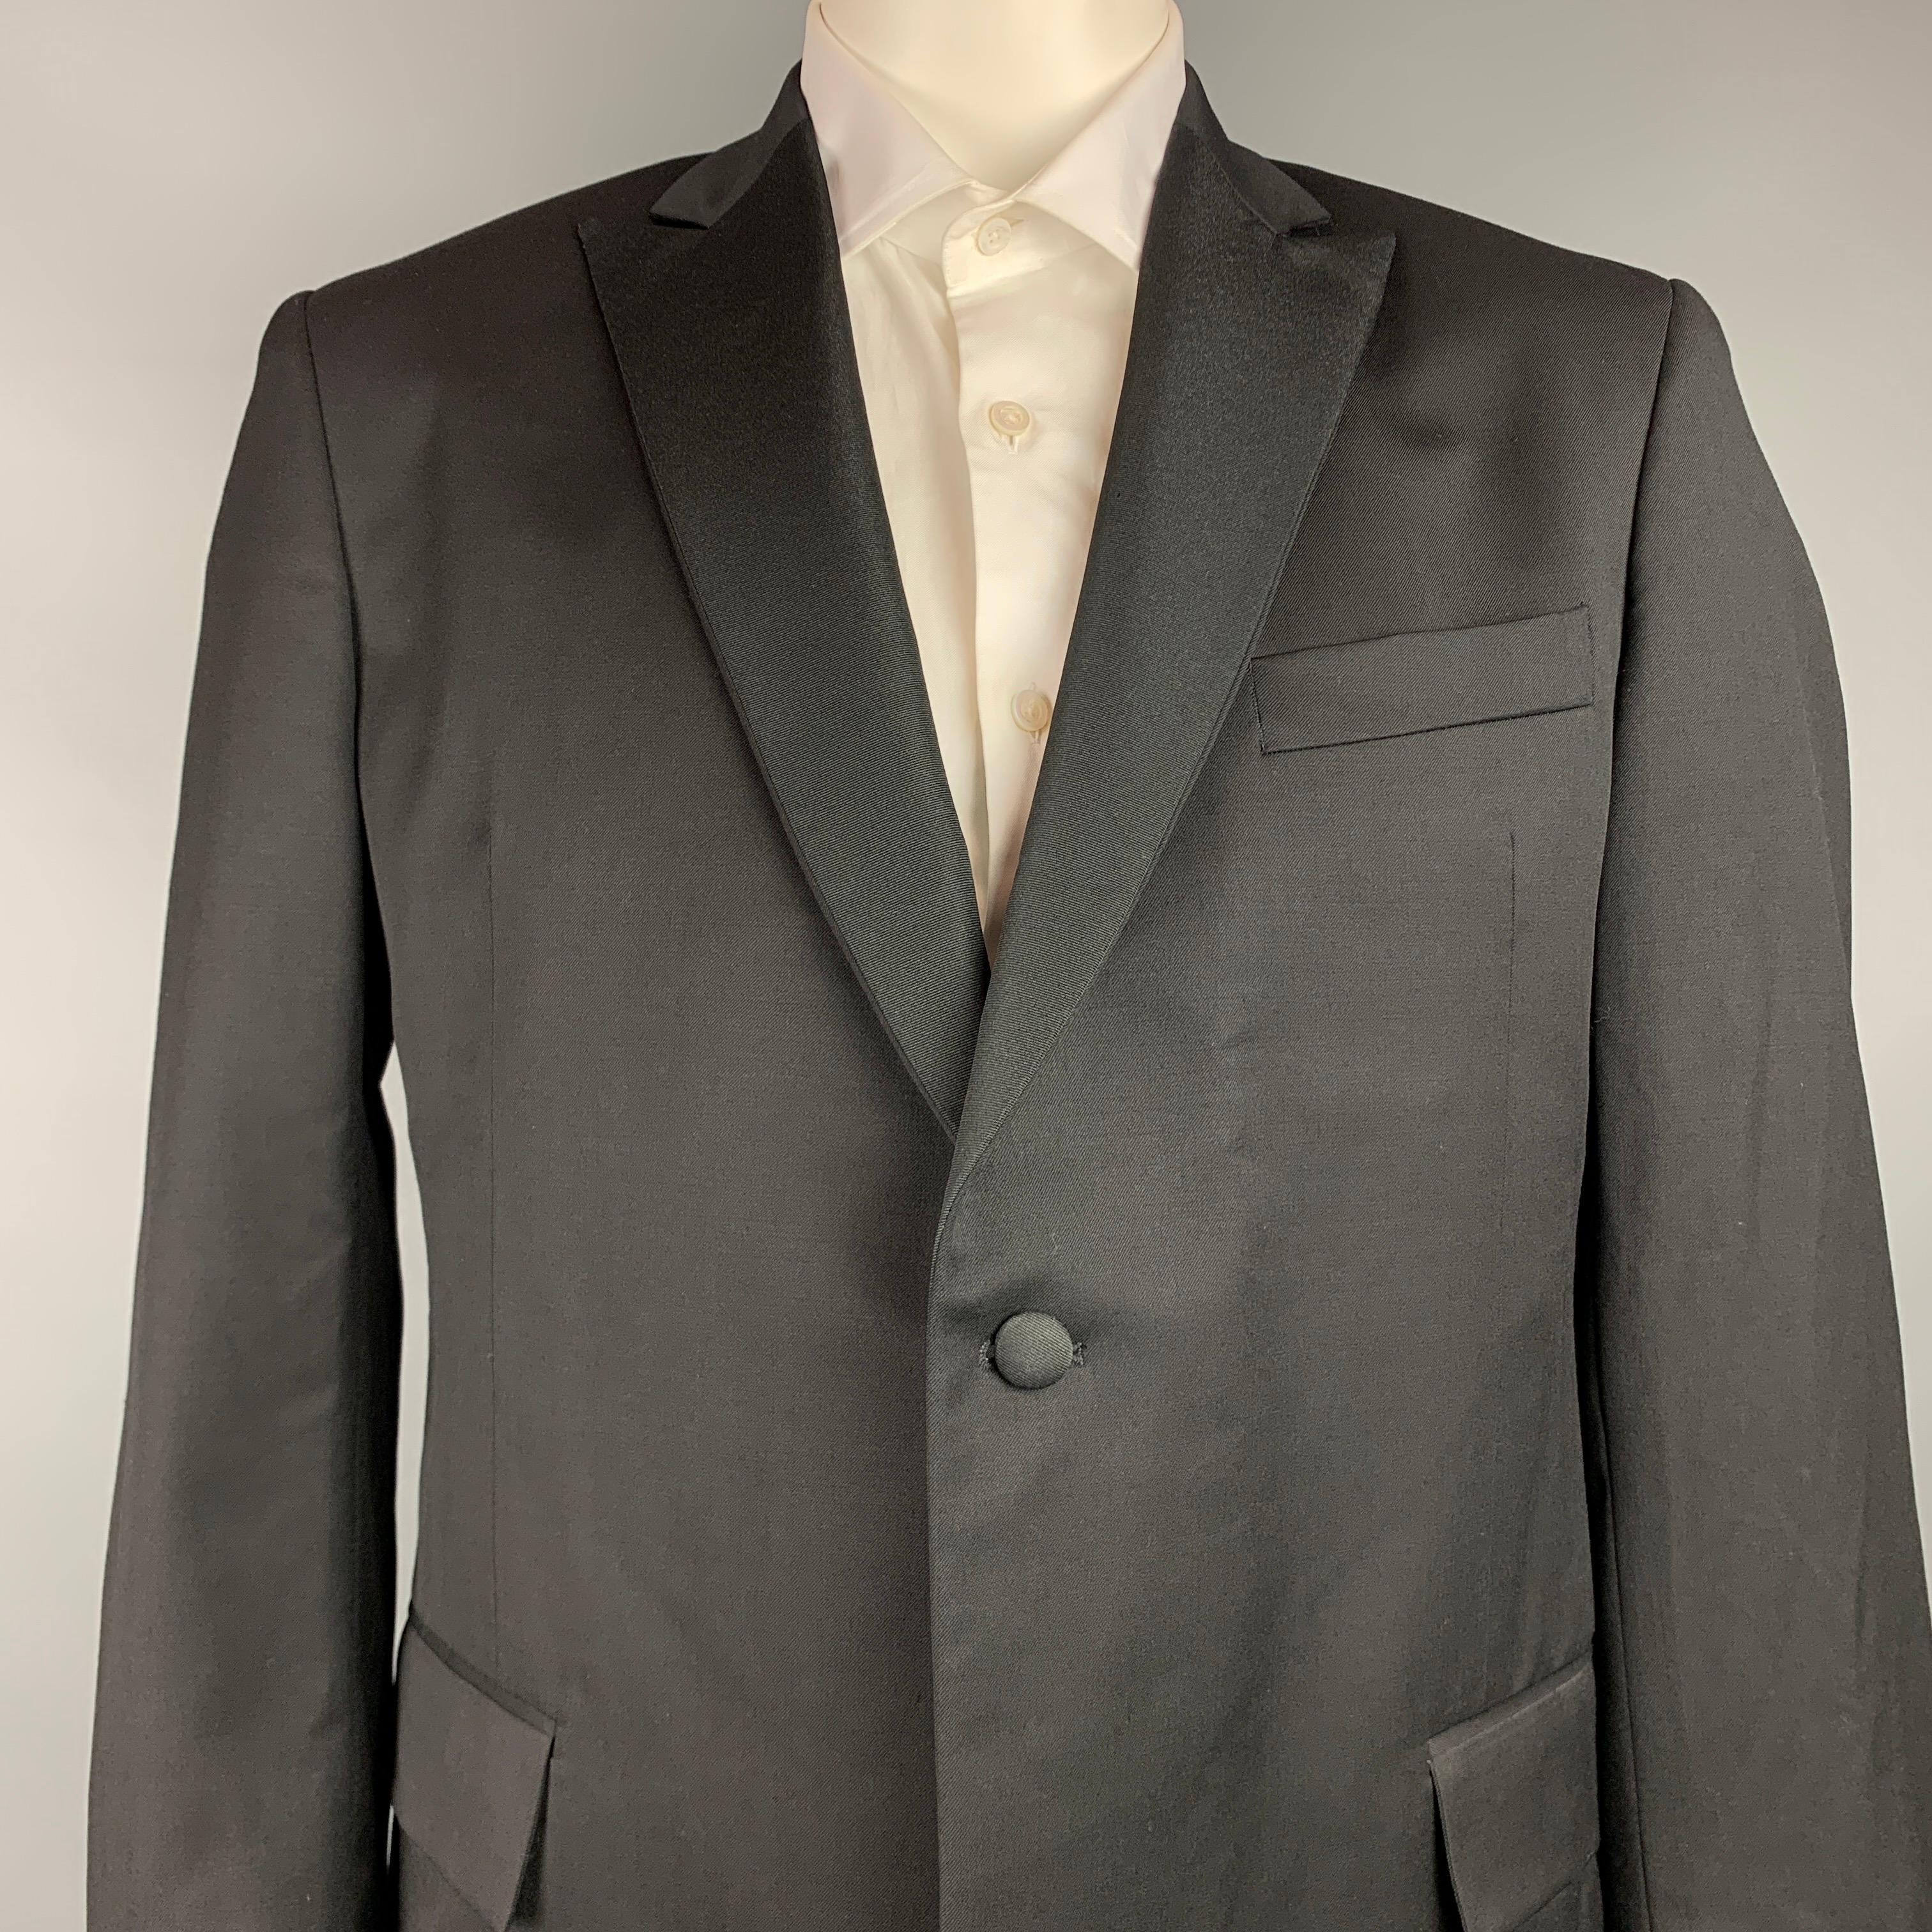 TODD SNYDER sport coat comes in a black wool with a full liner featuring a peak lapel, flap pockets, and a single button closure. Made in USA.

Very Good Pre-Owned Condition.
Marked: 44L

Measurements:

Shoulder: 19 in.
Chest: 44 in.
Sleeve: 26